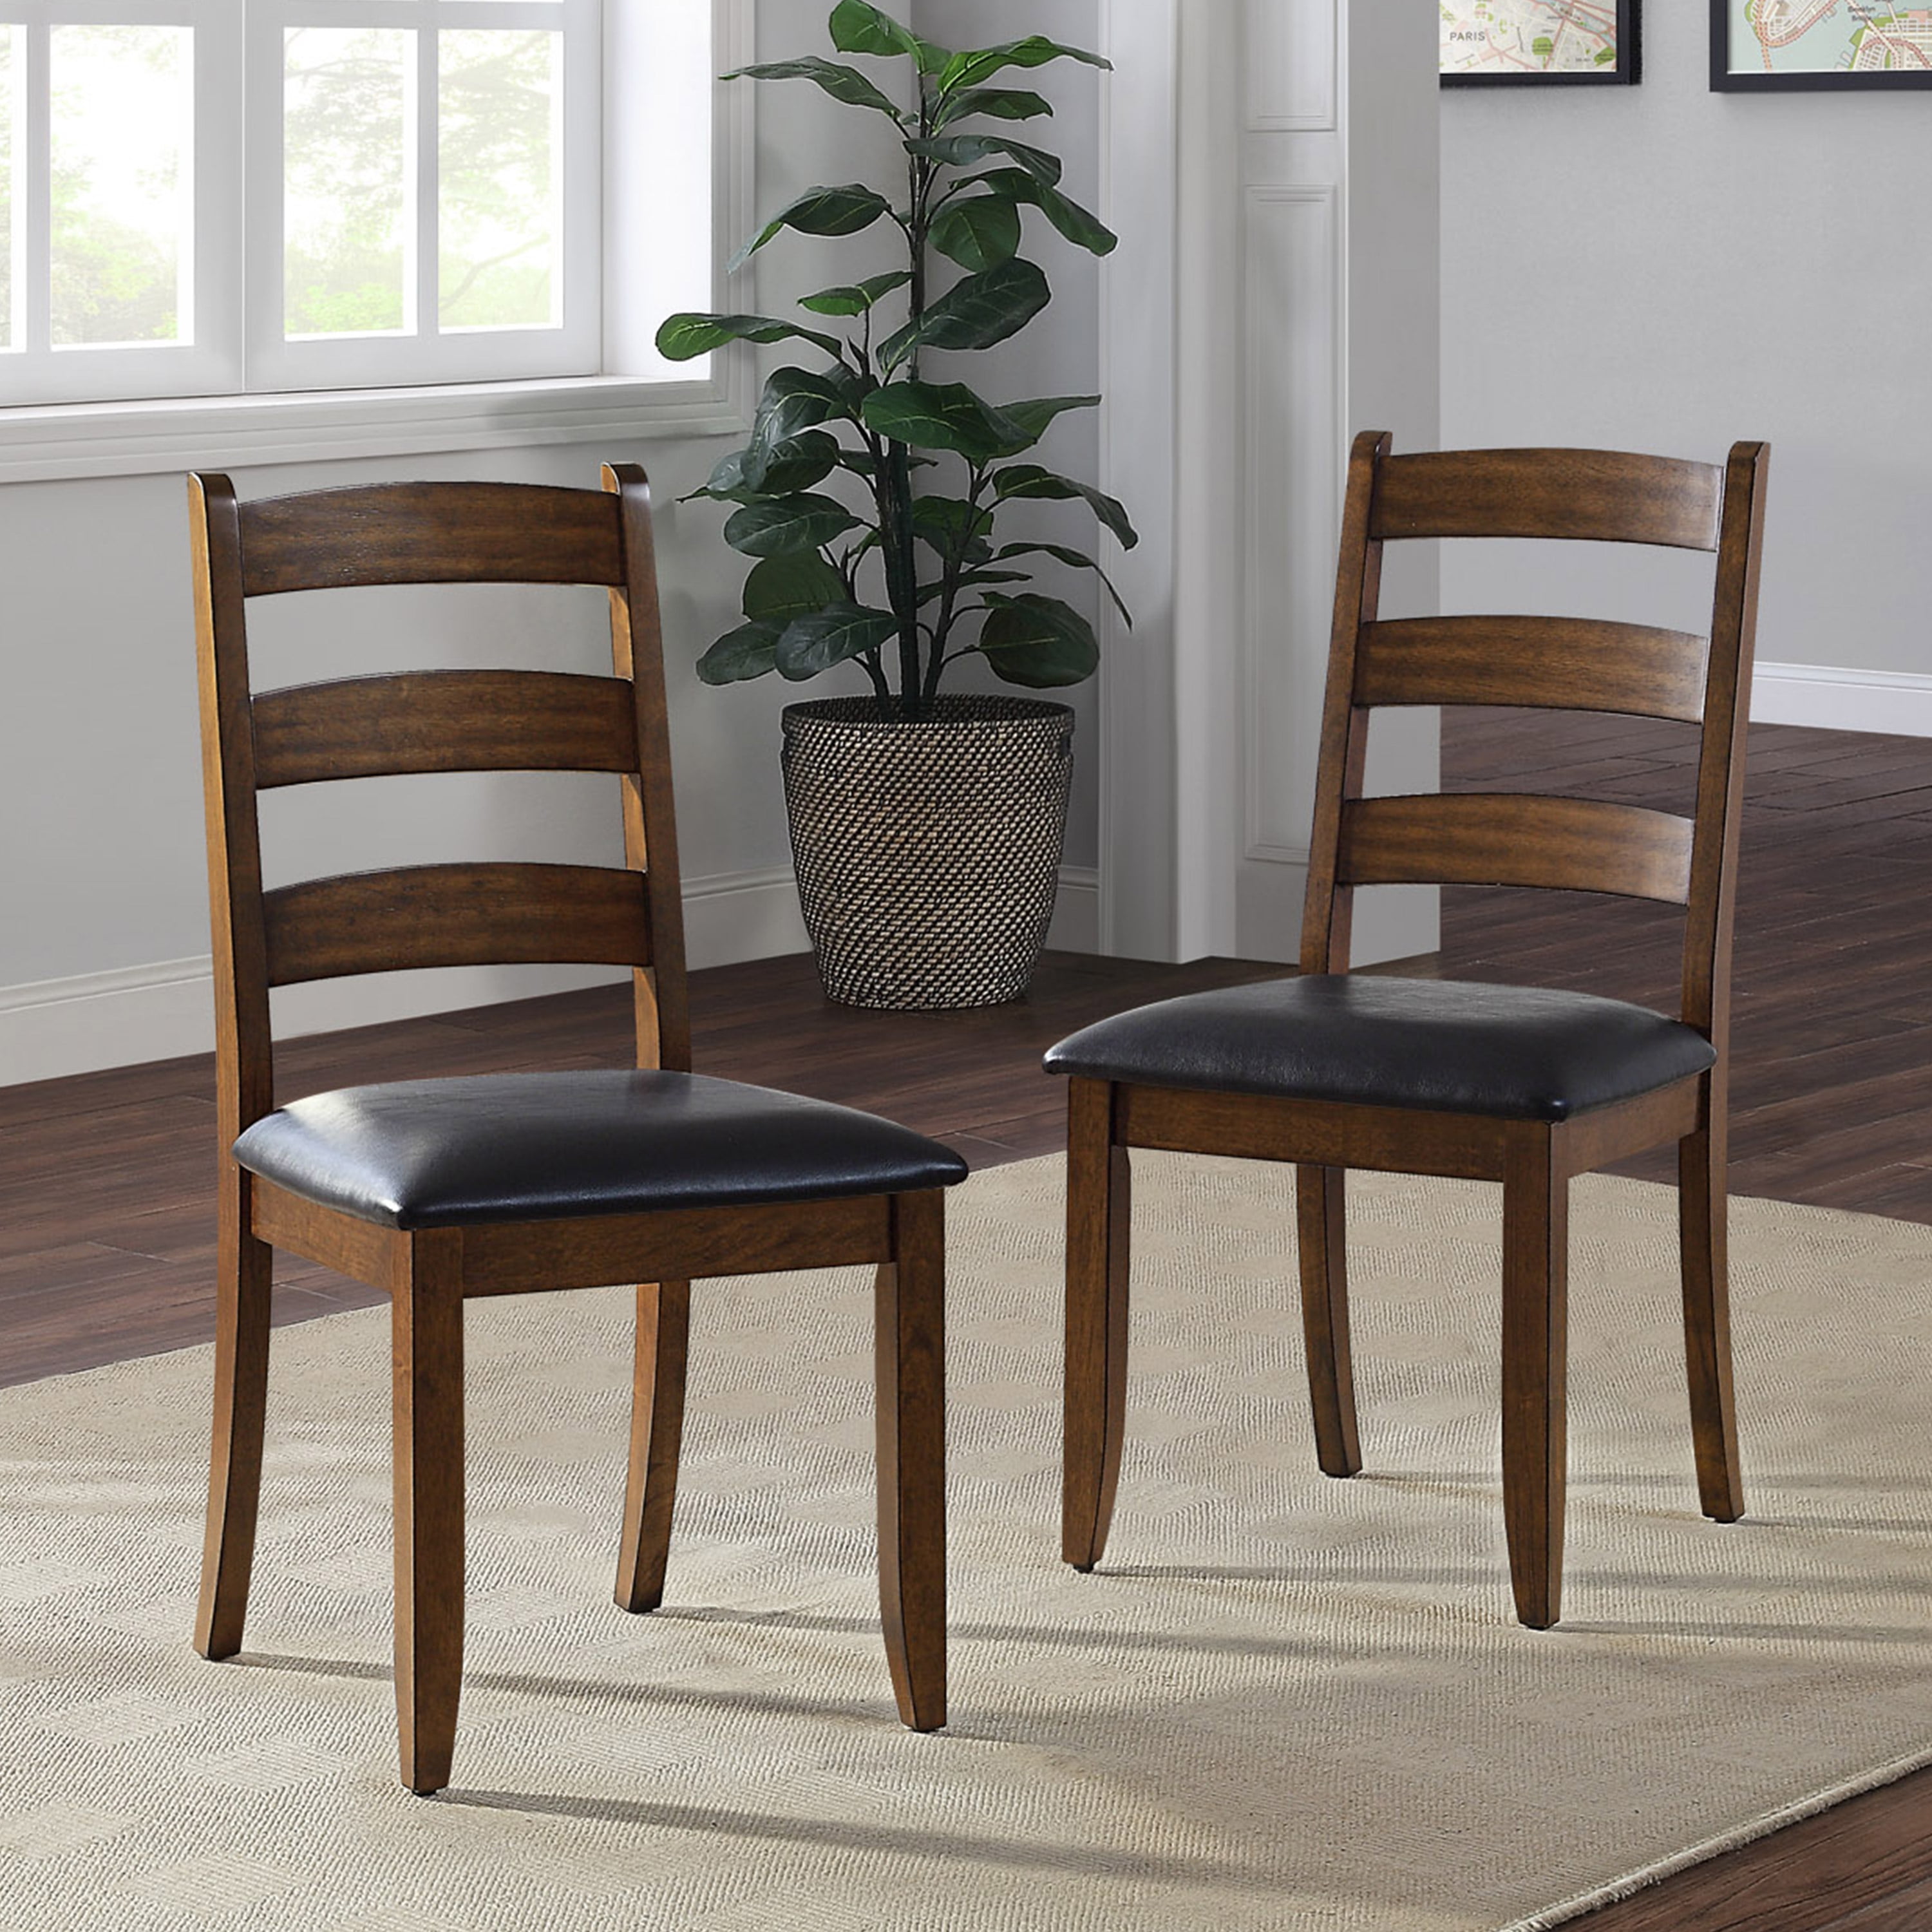 Better Homes Gardens Granary Modern, Better Homes And Gardens Gerald Dining Chairs